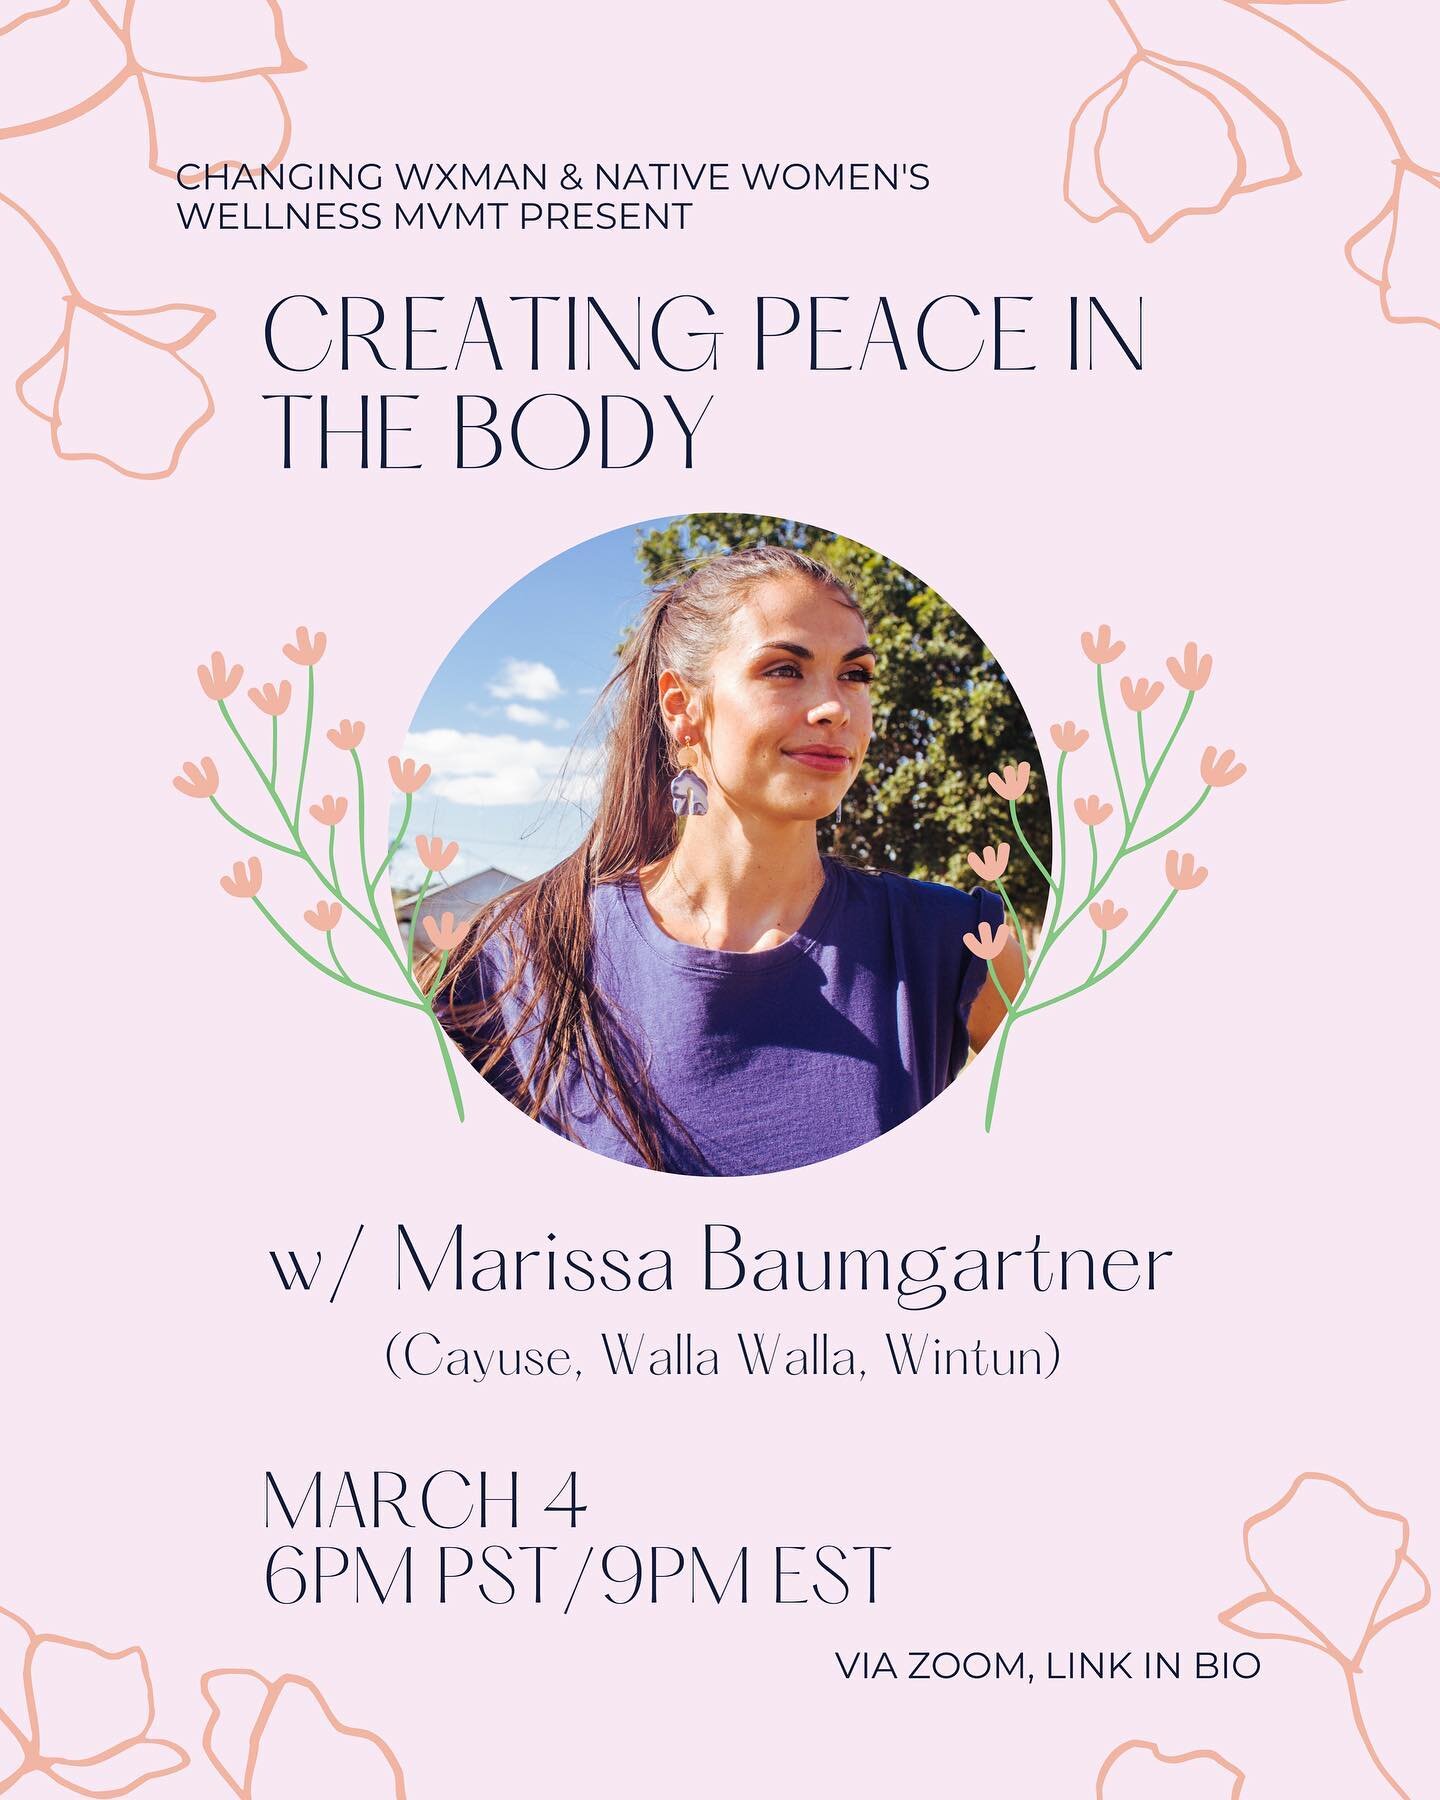 We are offering a free wellness workshop this Friday, March 4, to offer a healing and grounding space online in light of recent events in many of the communities that our members are a part of. Folks are also welcome to join via Zoom w/ cameras/mics 